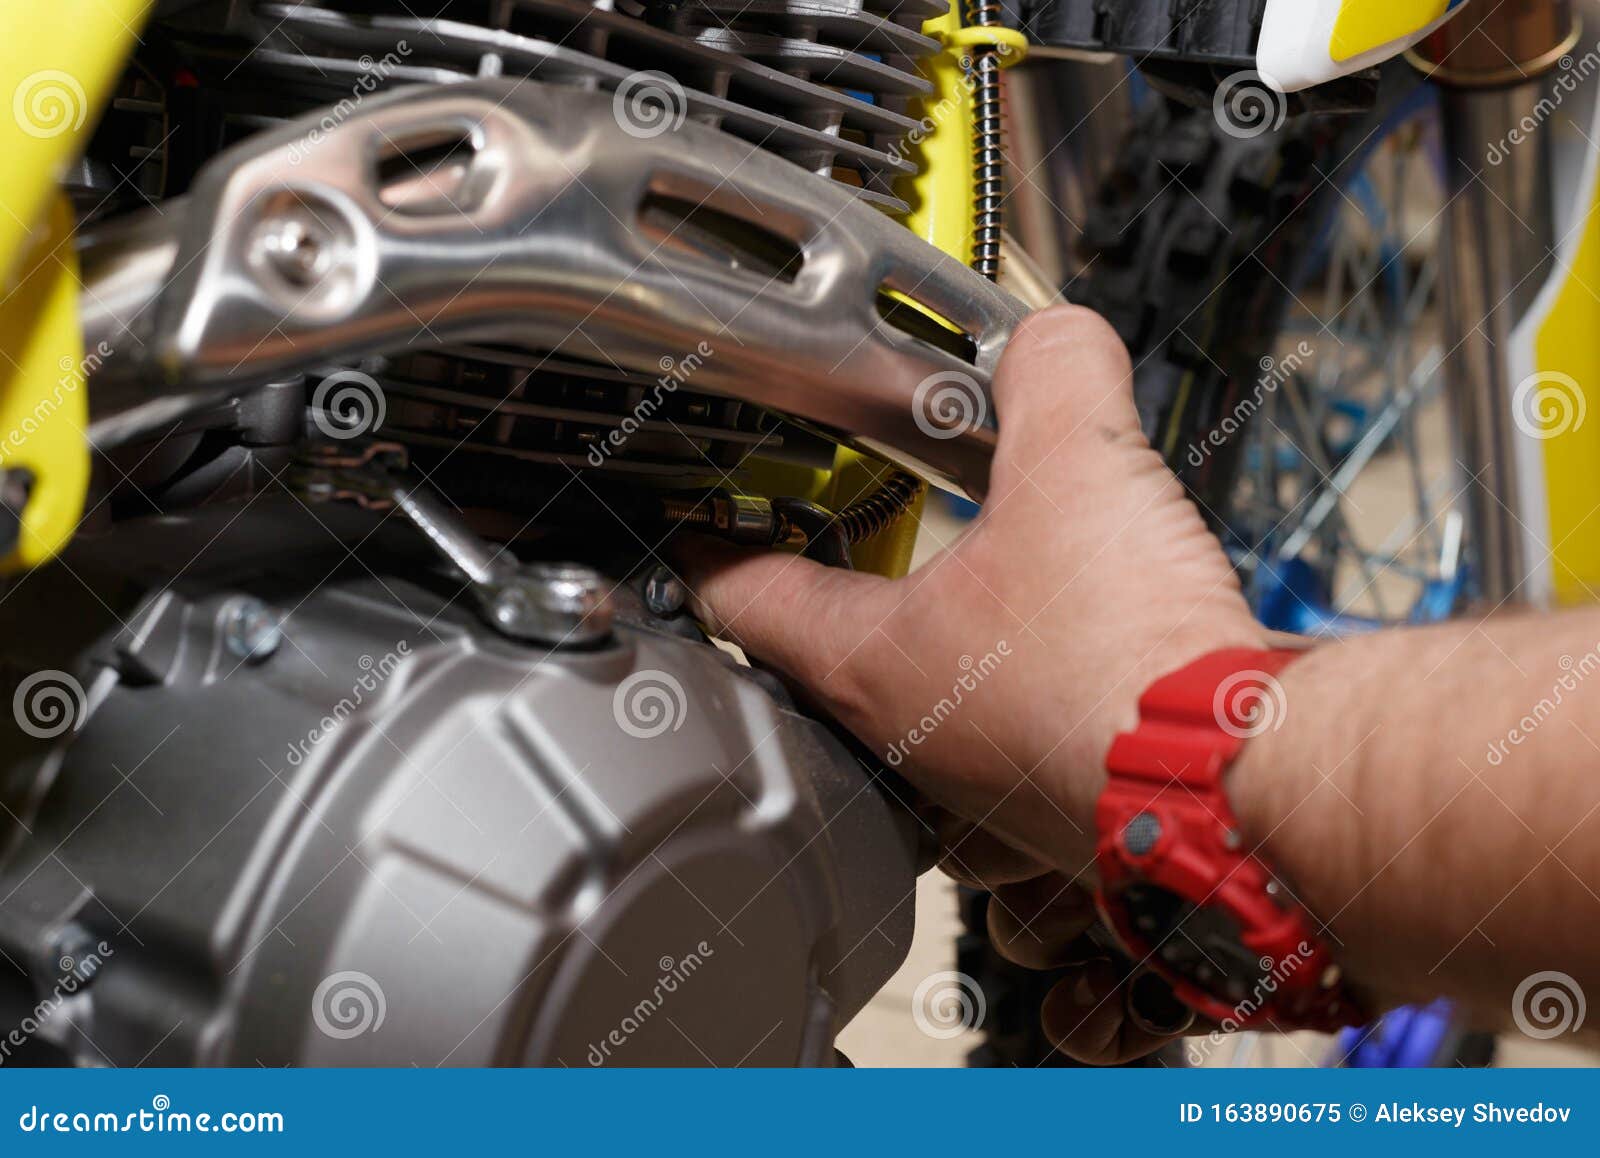 man fixing protection of exhaust of motorcicle